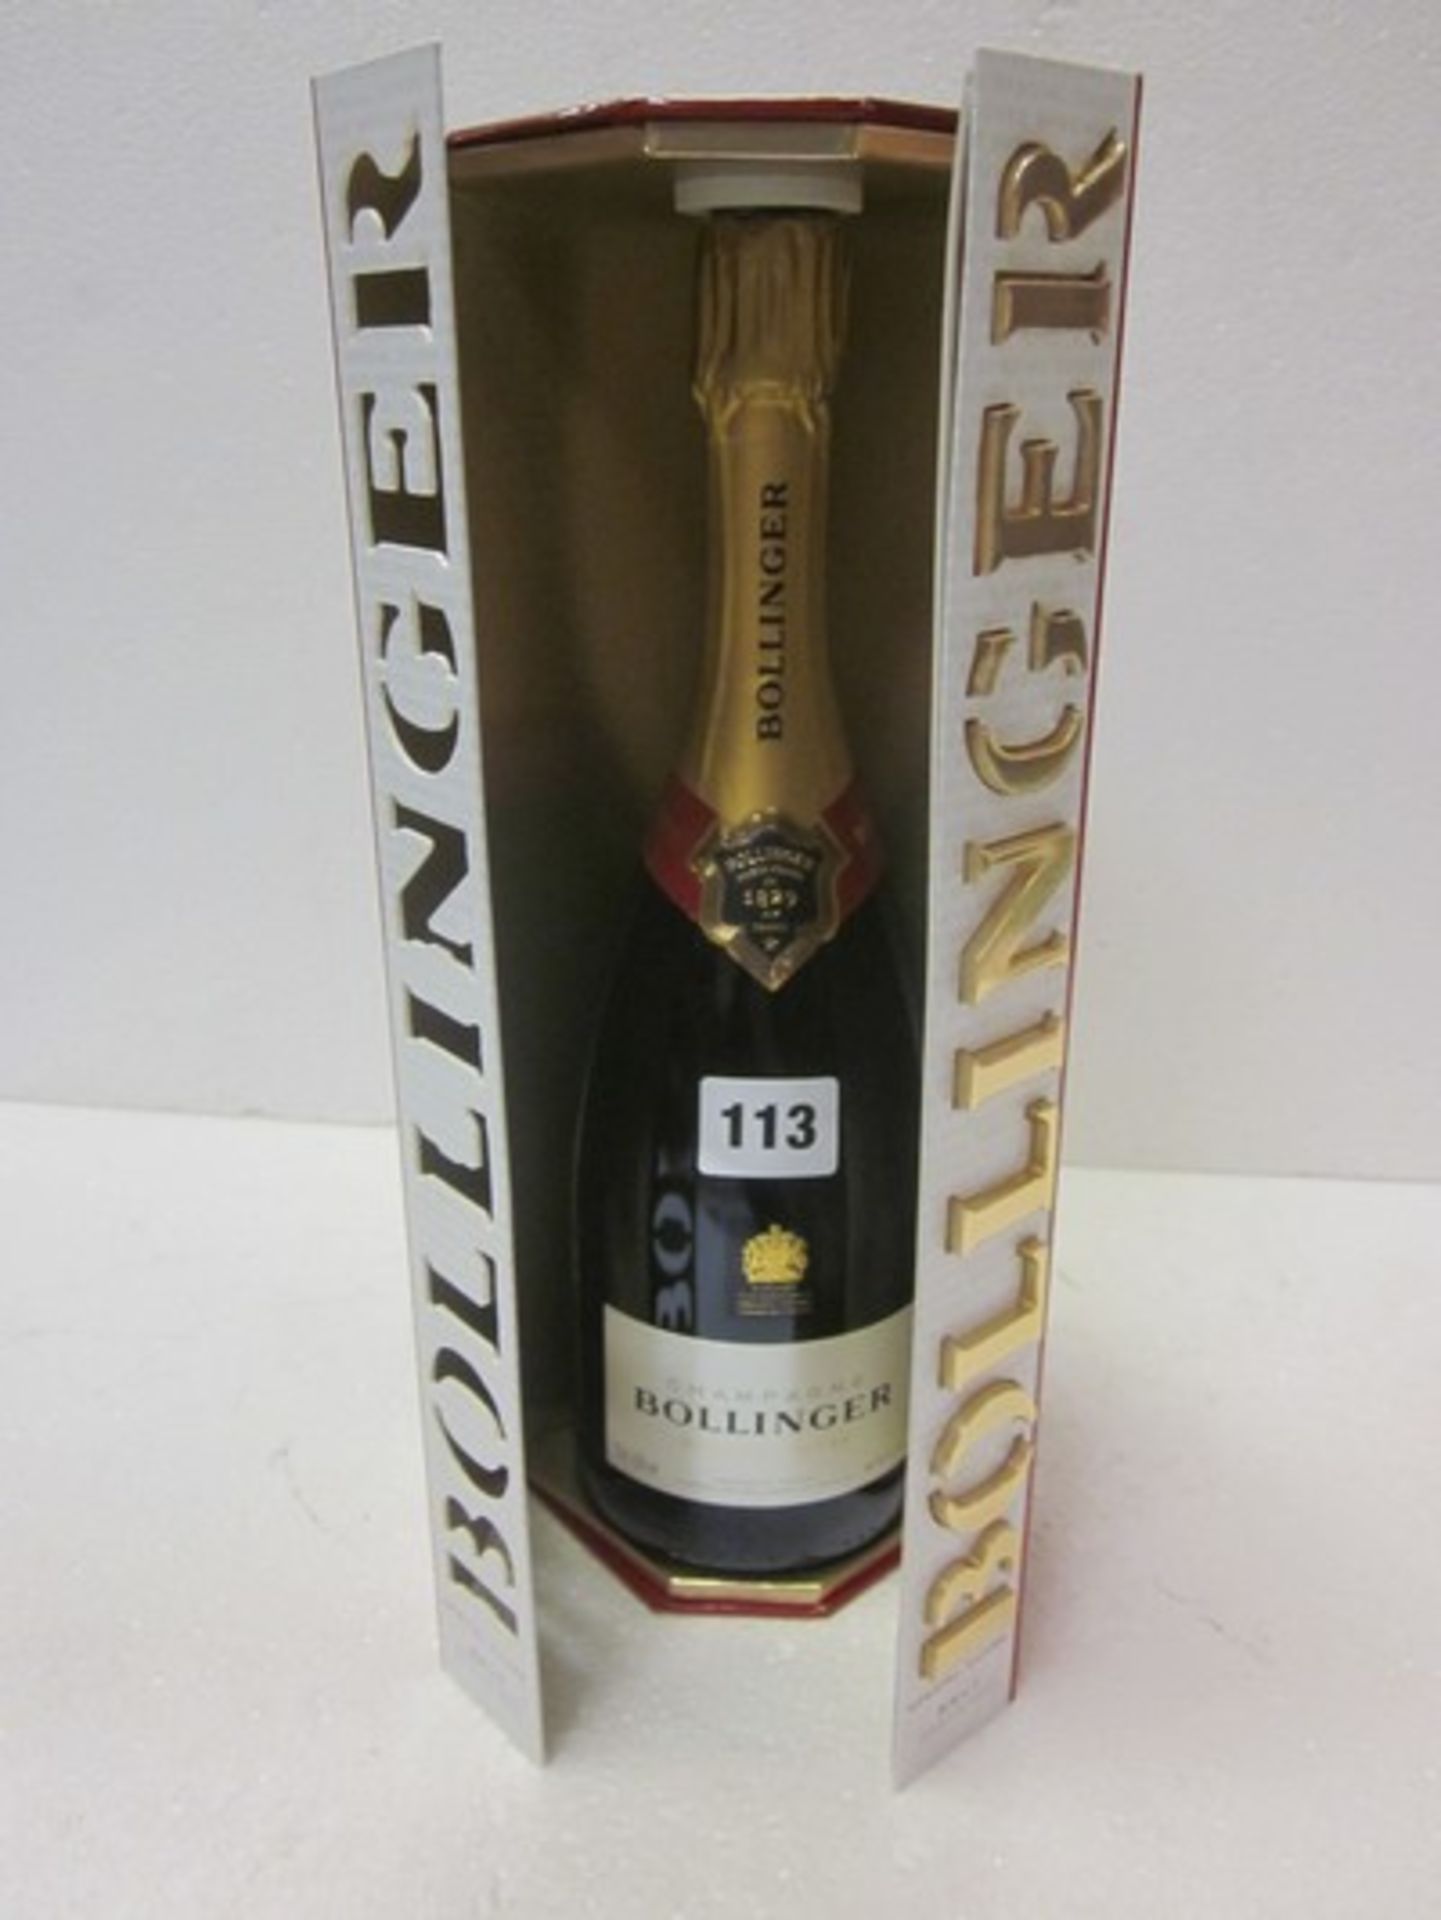 *A boxed bottle of Bollinger Special Cuvee champagne. (Over 18's only) Payment and collection by 5pm